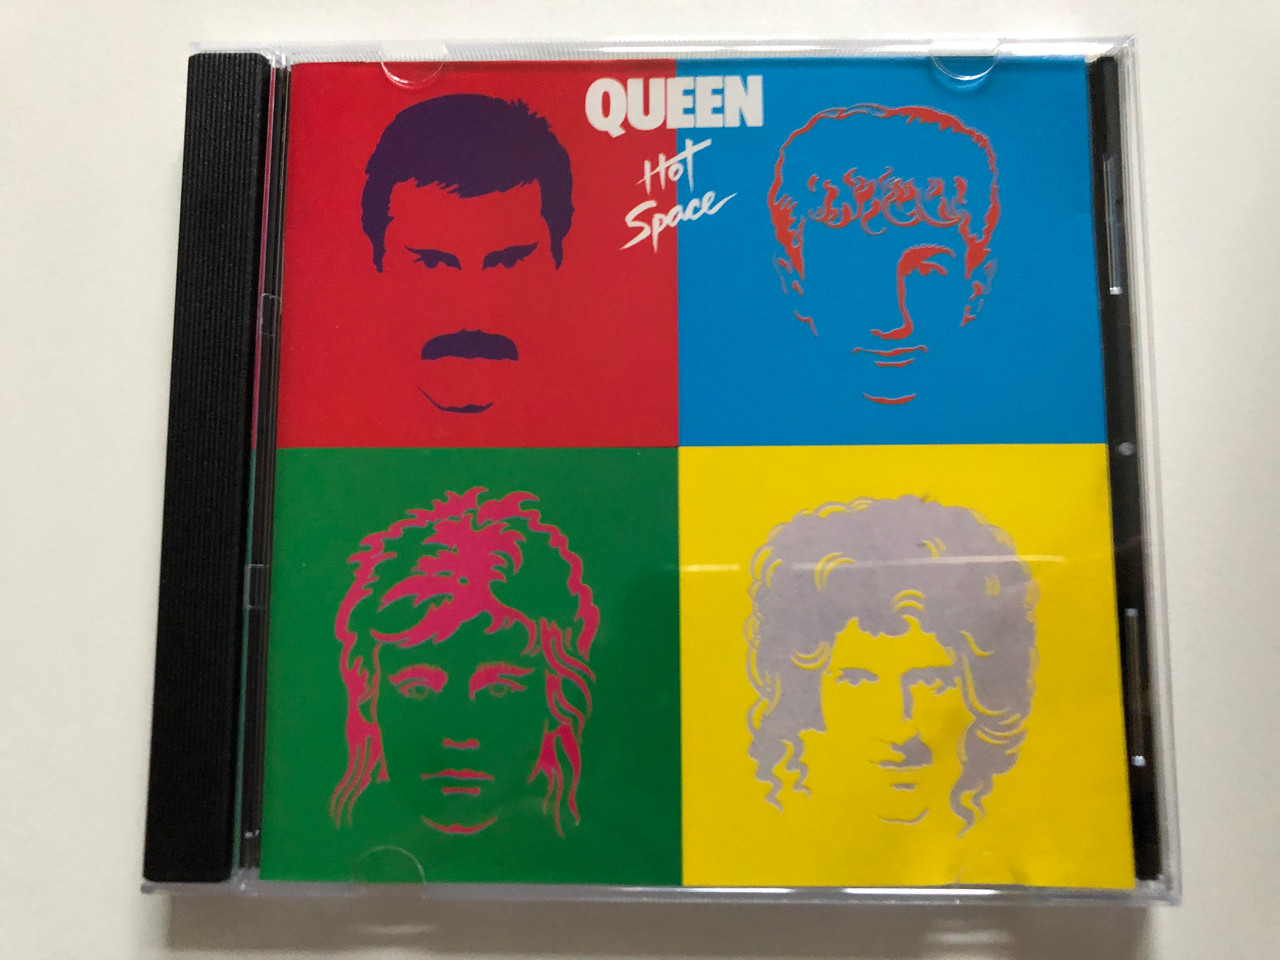 https://cdn10.bigcommerce.com/s-62bdpkt7pb/products/30390/images/179837/Queen_Hot_Space_Parlophone_Audio_CD_1994_Stereo_077778949725_1__09225.1622487242.1280.1280.JPG?c=2&_ga=2.14671607.1770360979.1622477249-381146805.1622477249